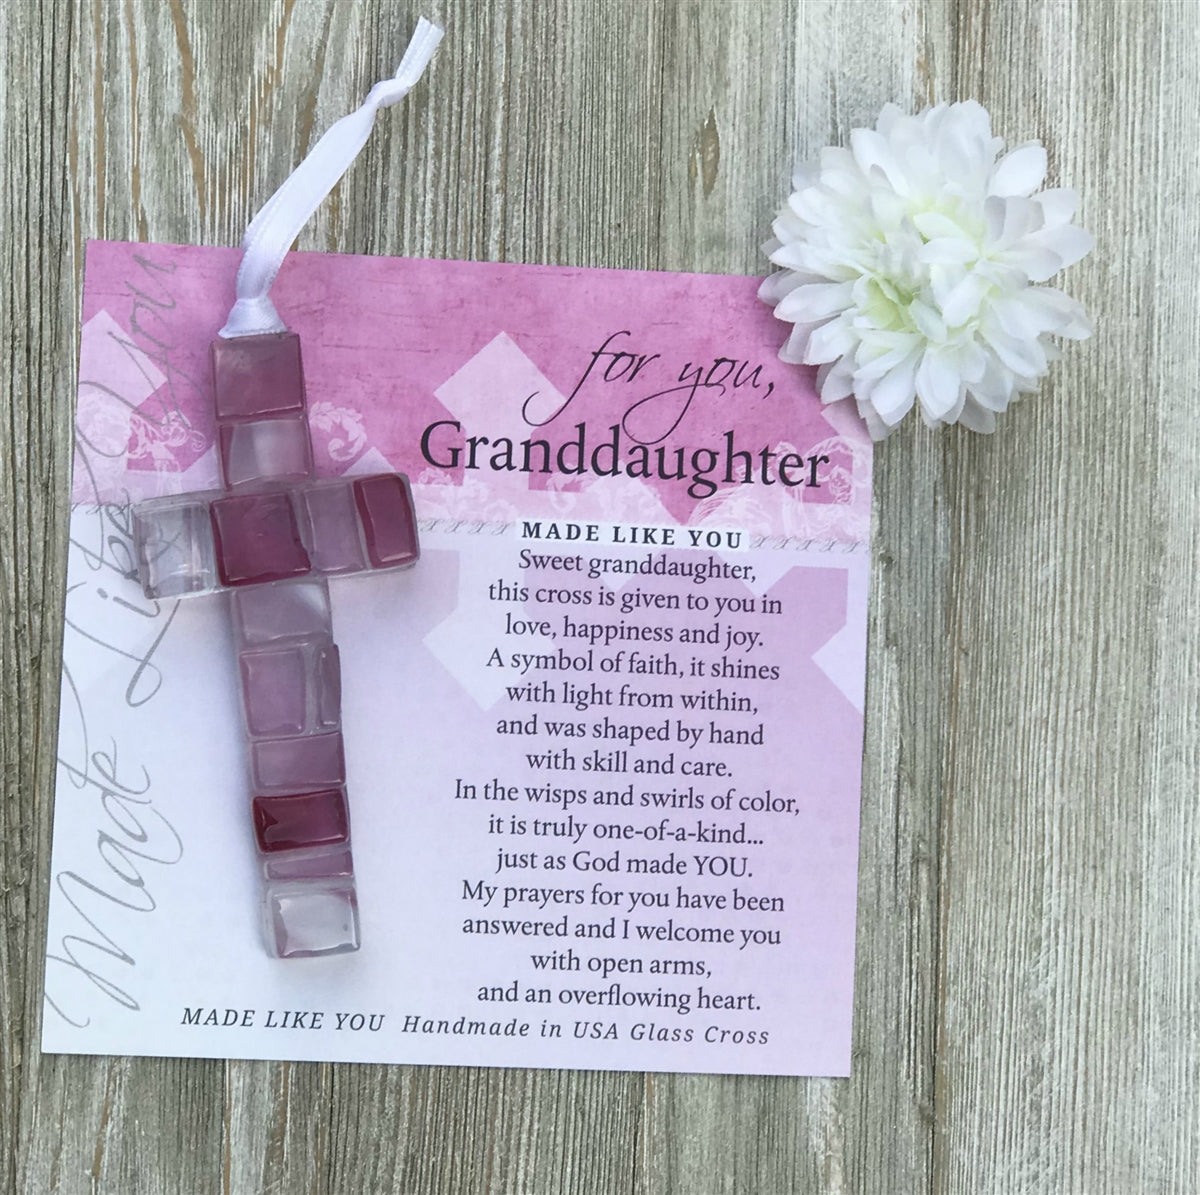 Pink mosaic cross with shades of pink, clear, and white lying on the &quot;For You, Granddaughter&quot; sentiment artwork.